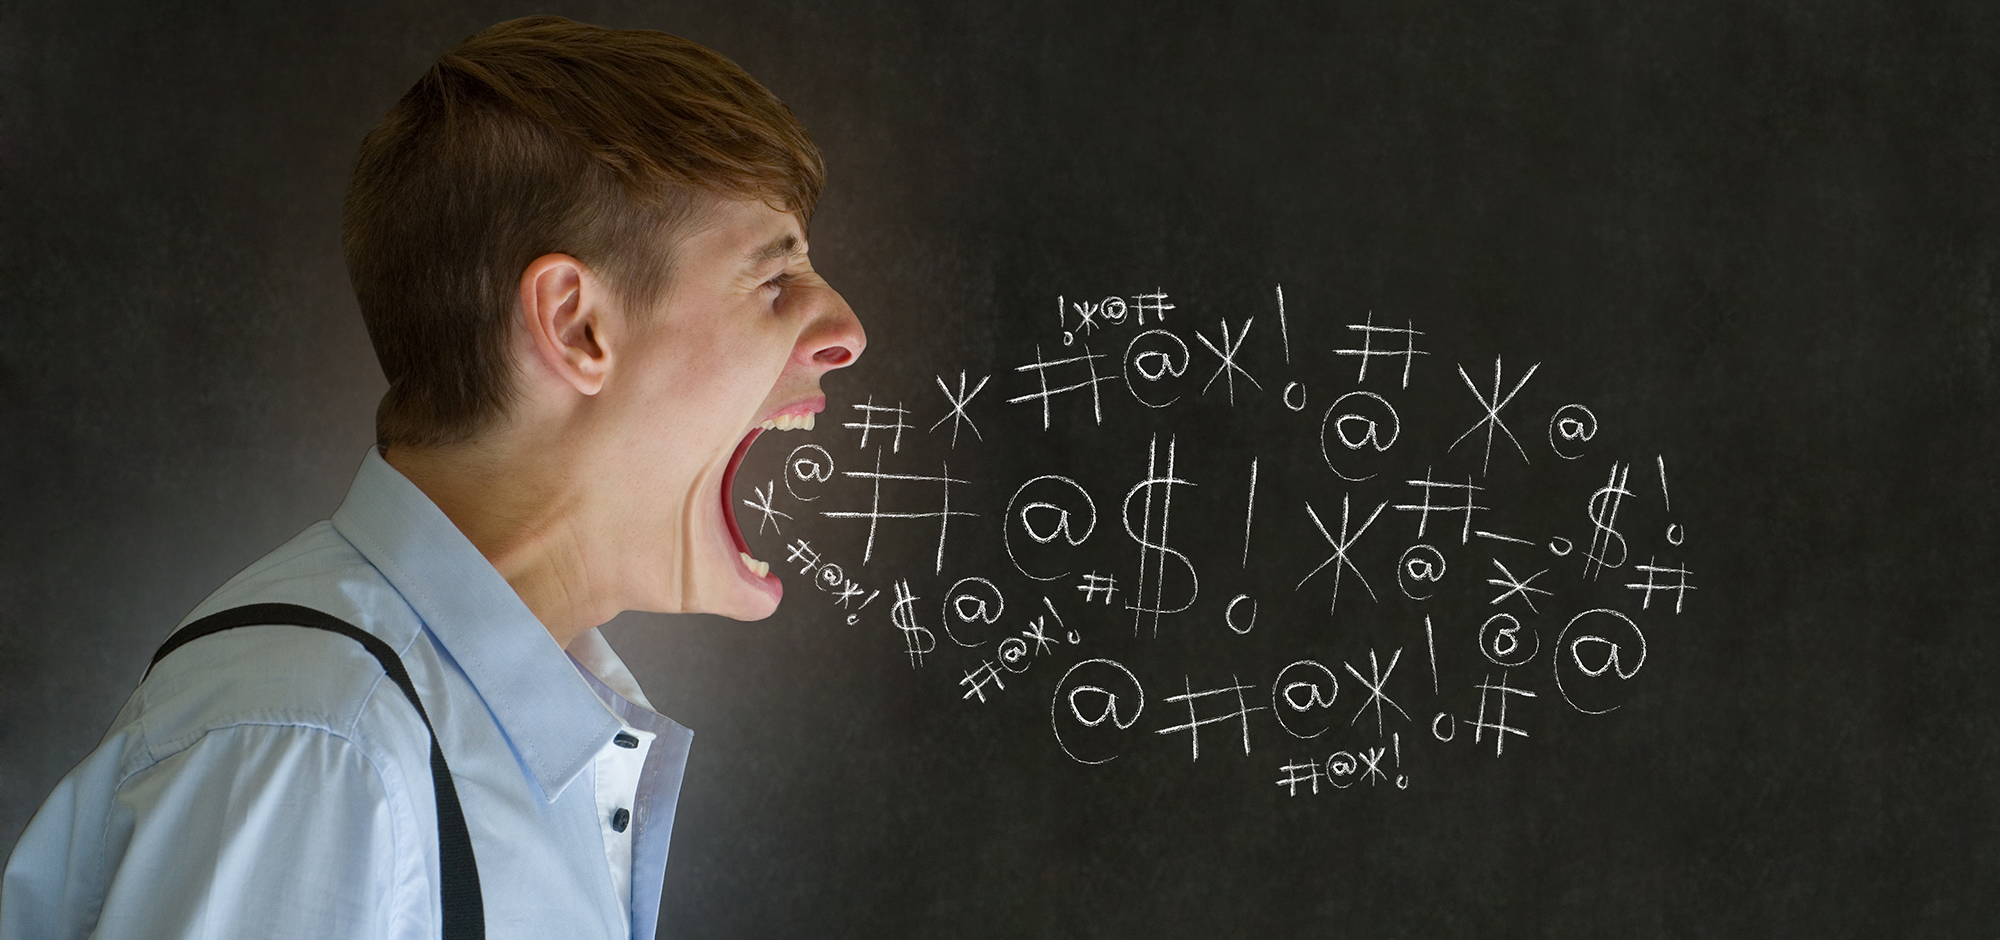 Man teacher, salesman, student or businessman angry, shouting and swearing with chalk blackboard background